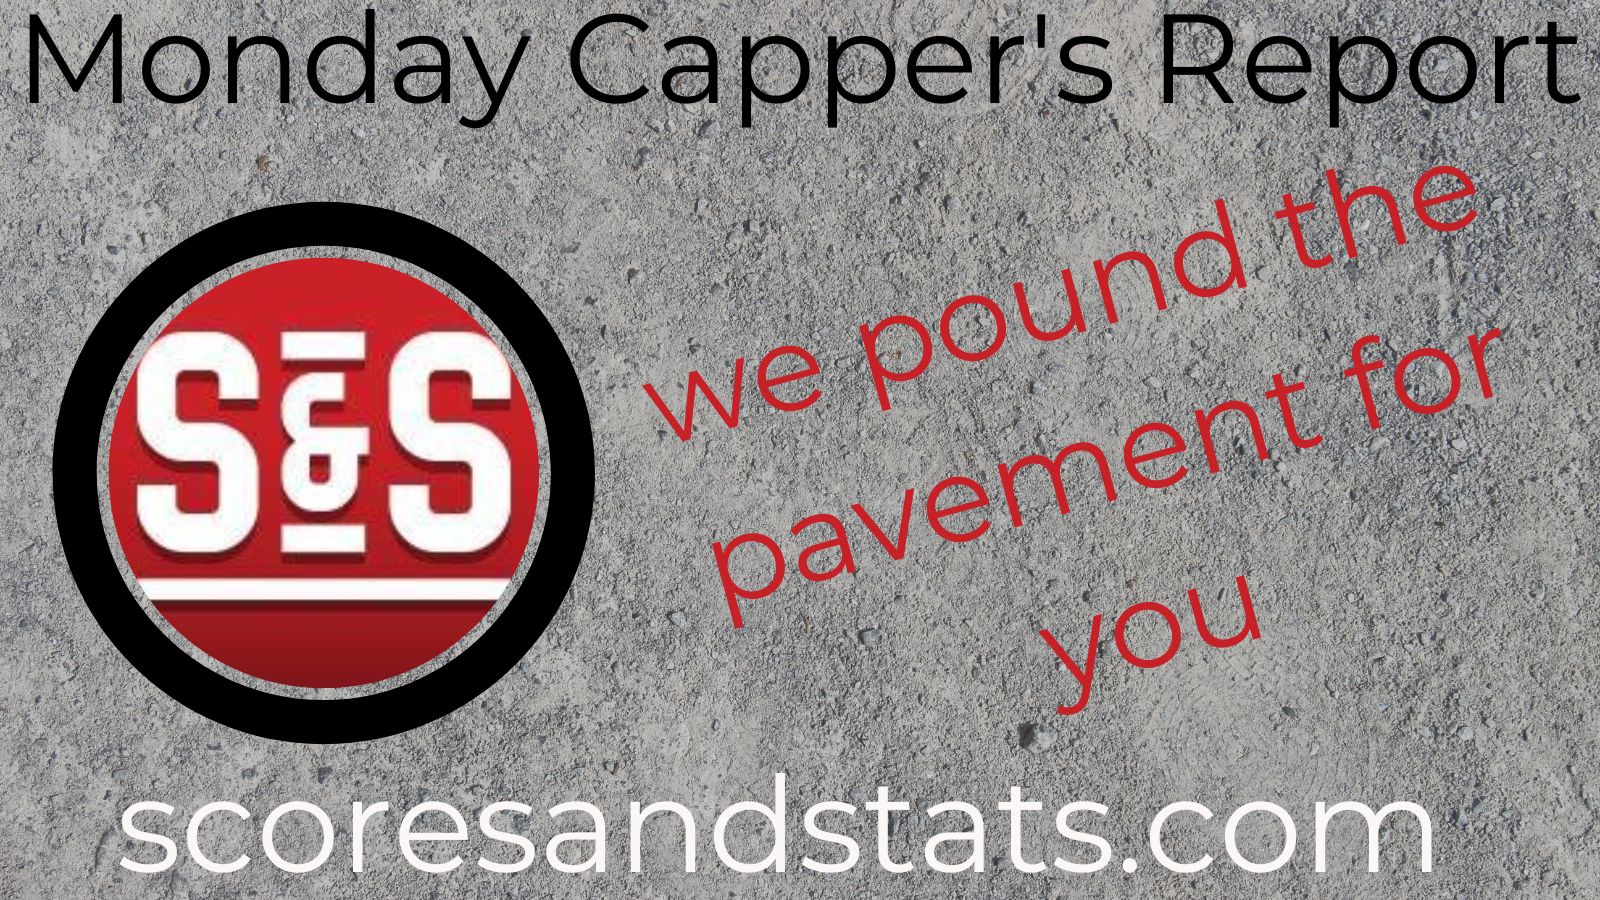 Scores And Stats على تويتر Sands Monday Cappers Report Who Is On Fire As We Wrap Up The Nba